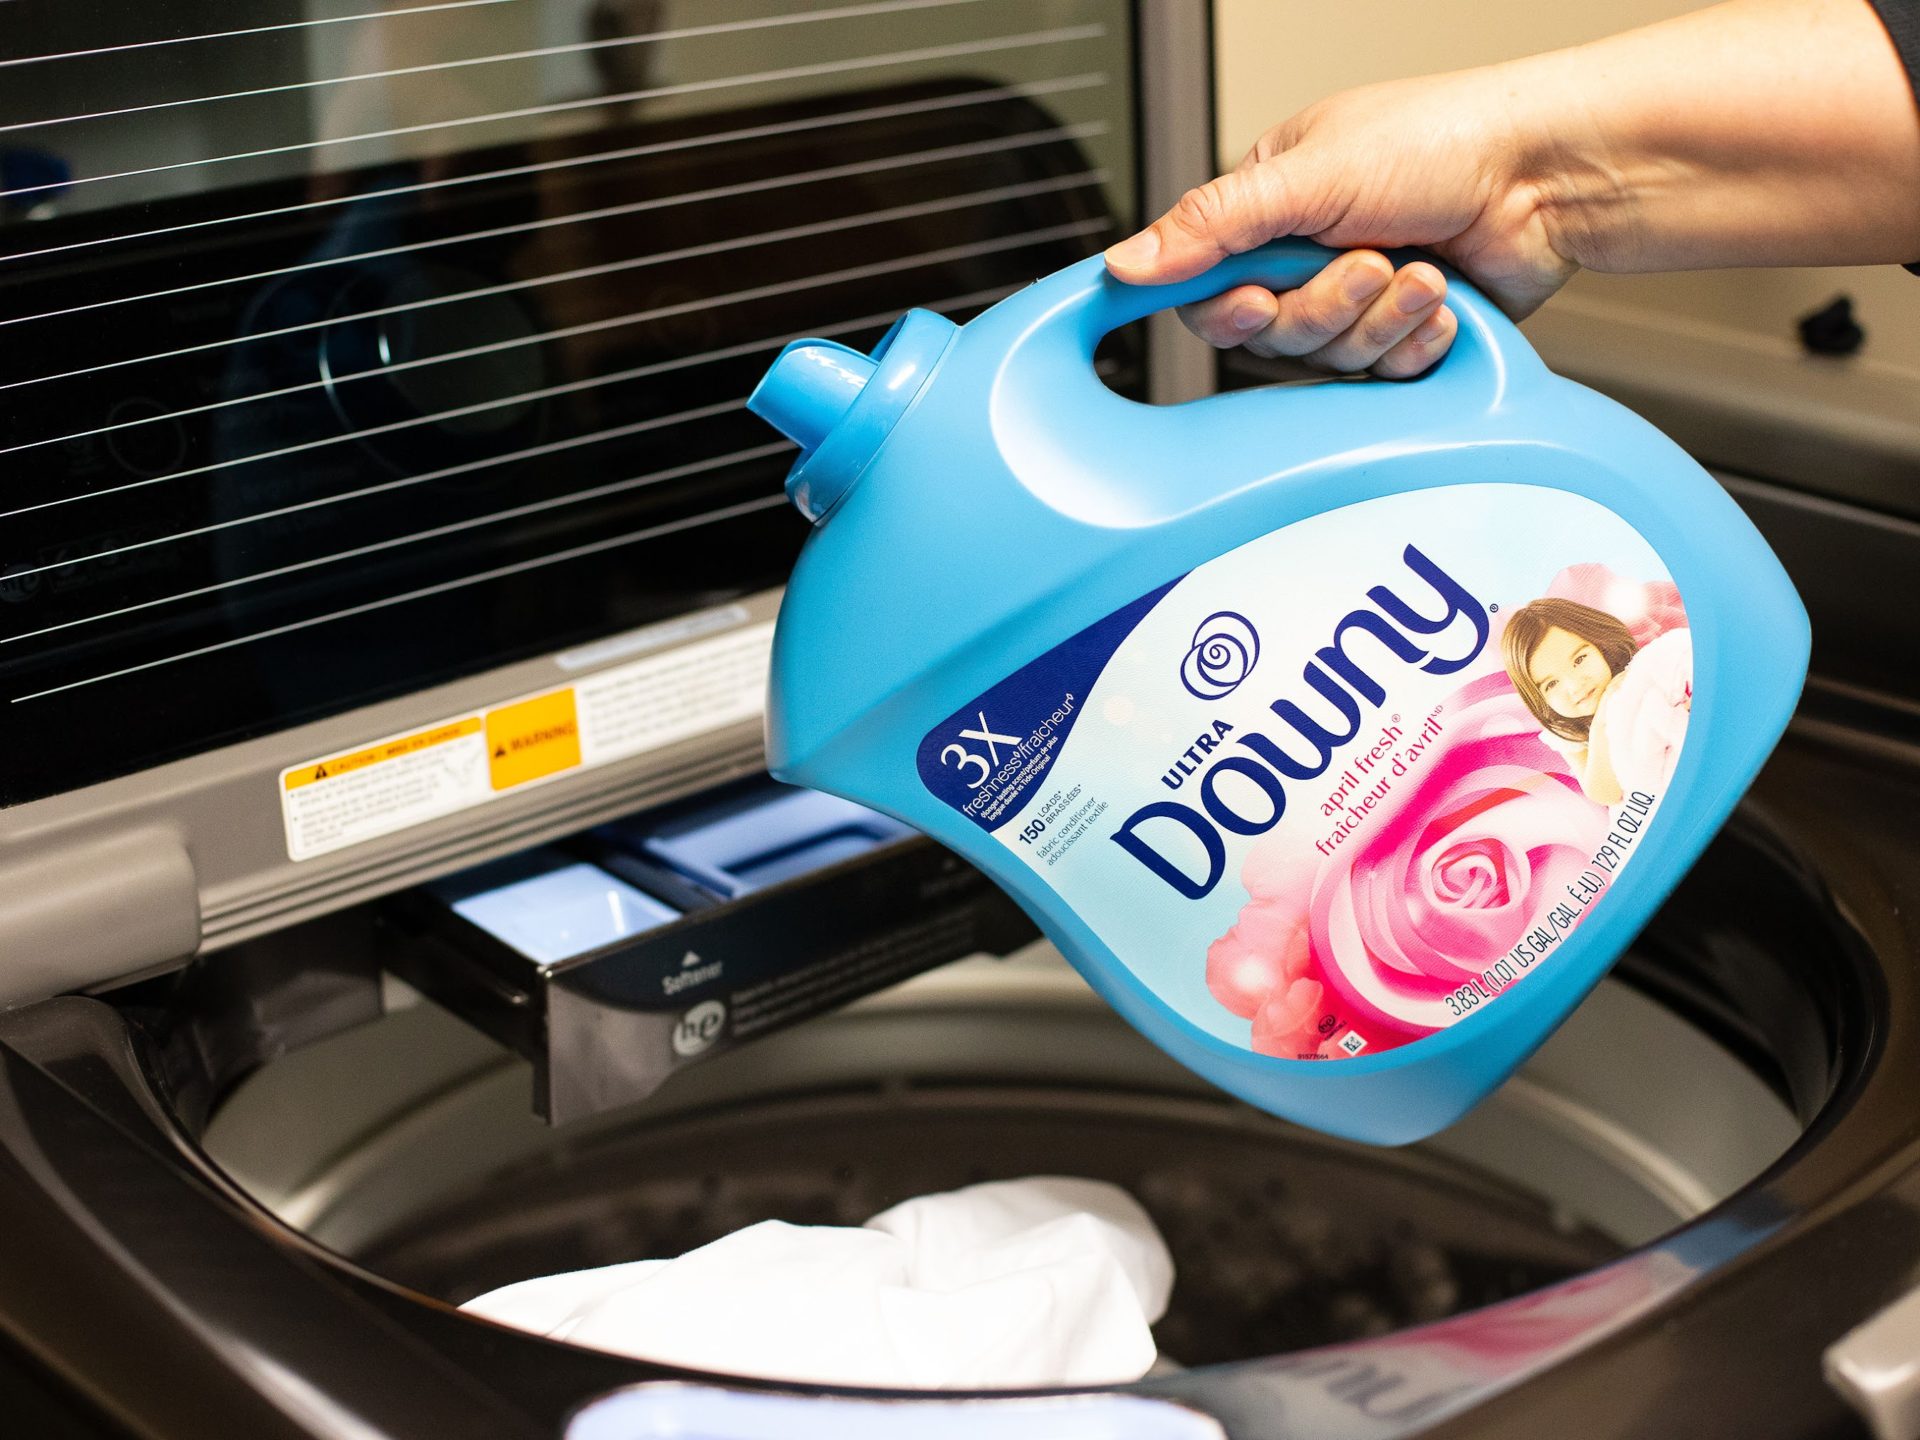 Big Bottles Of Downy Fabric Softener As Low As $6.99 At Kroger